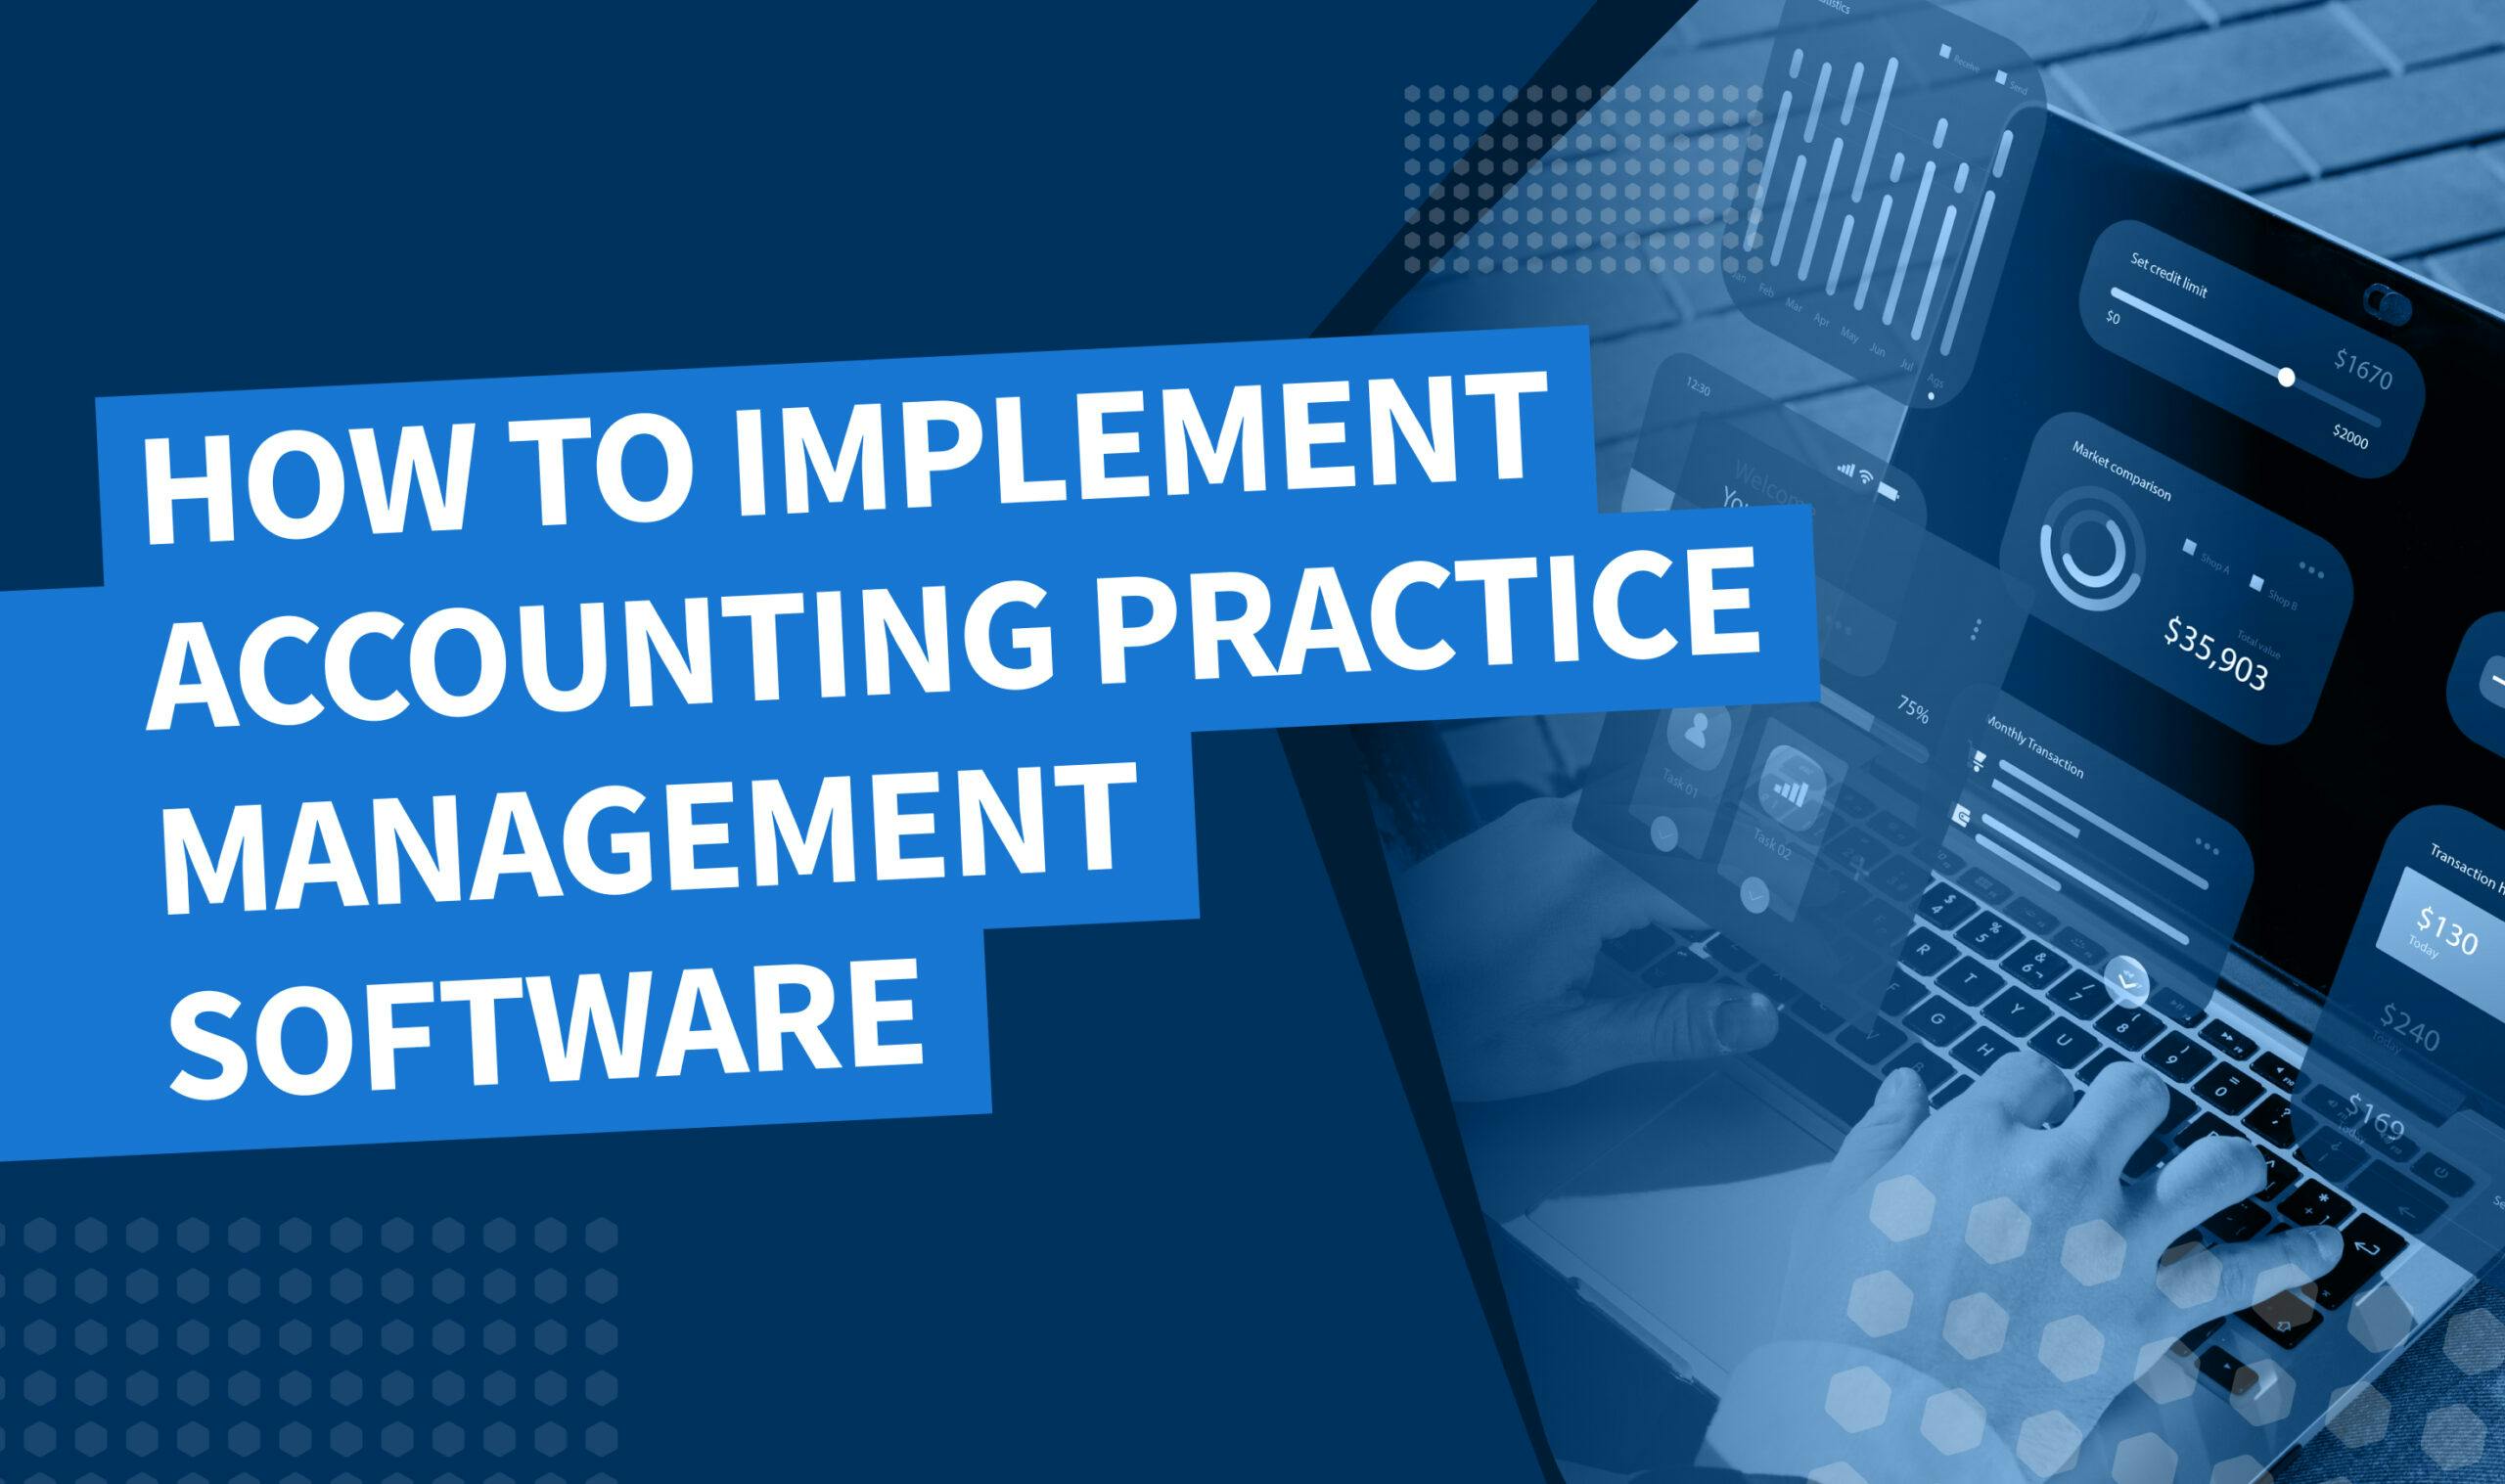 How to implement accounting practice management software